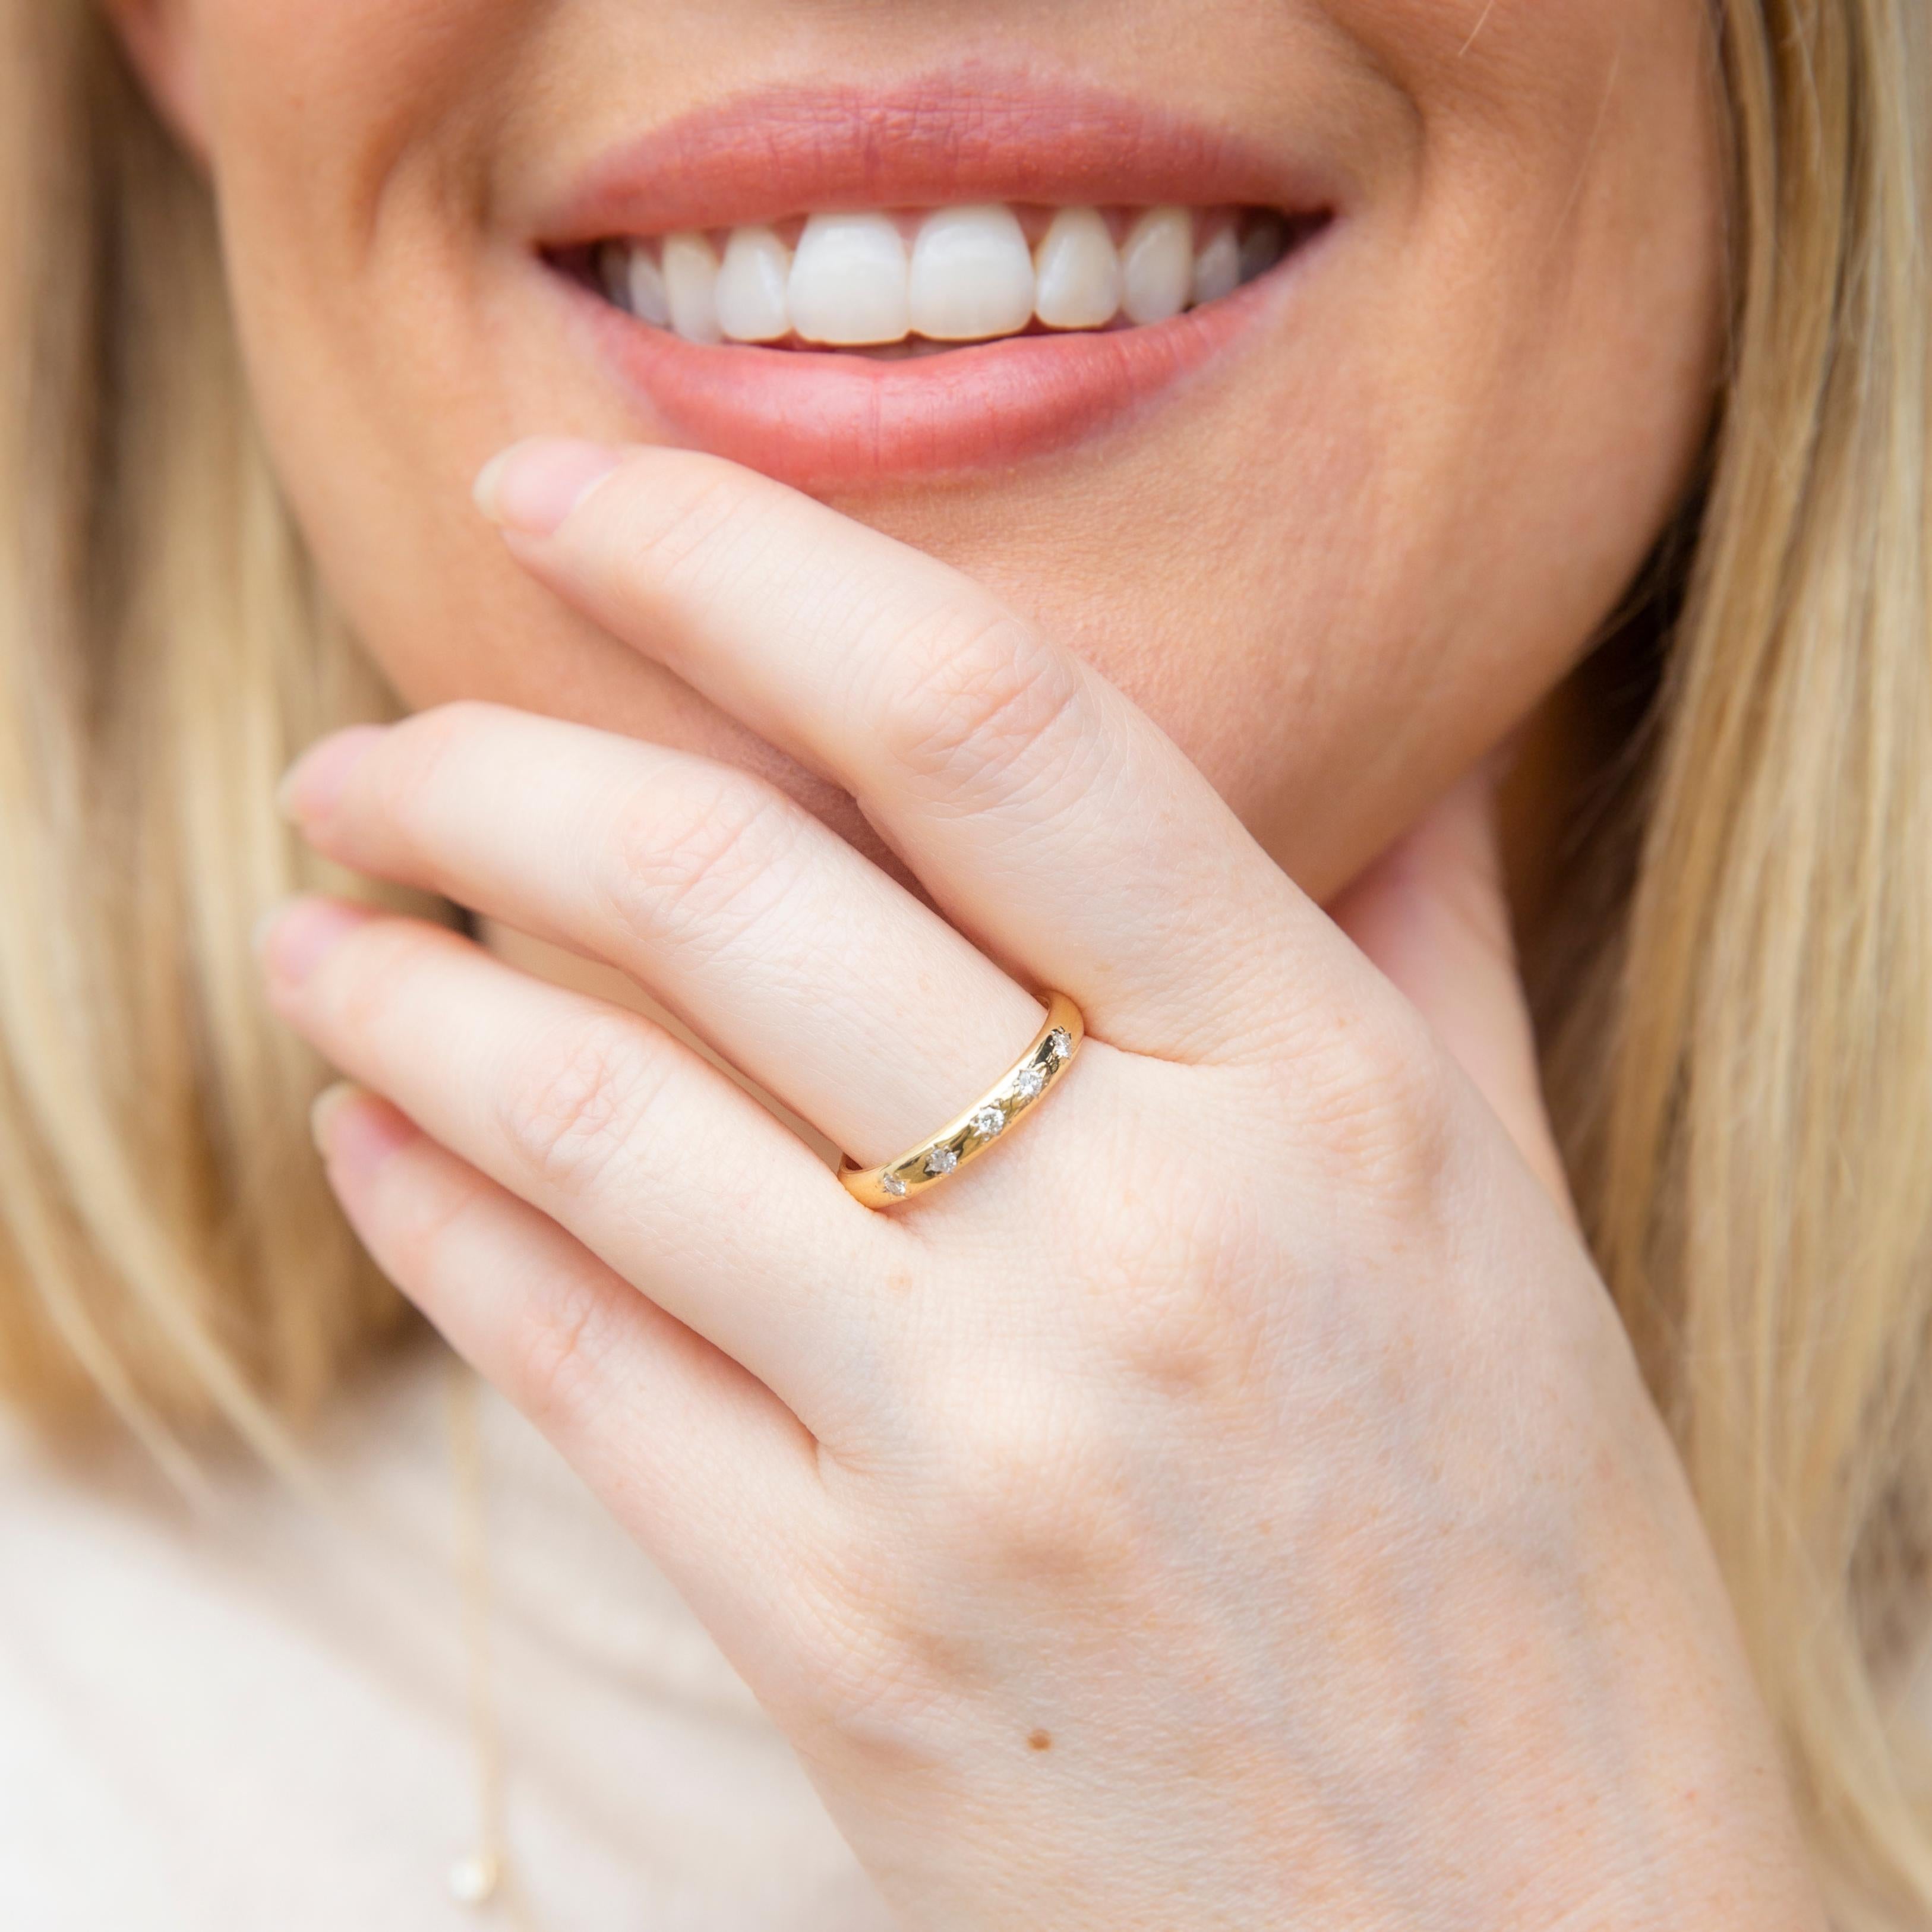 Crafted in 18 carat gold, The Selma Ring is a classic jewel set with five sparkling diamonds around her elegant curved front. A wonderful symbol of shared love, where two hearts beat as one, she is a true darling.

The Selma Ring Gem Details
The